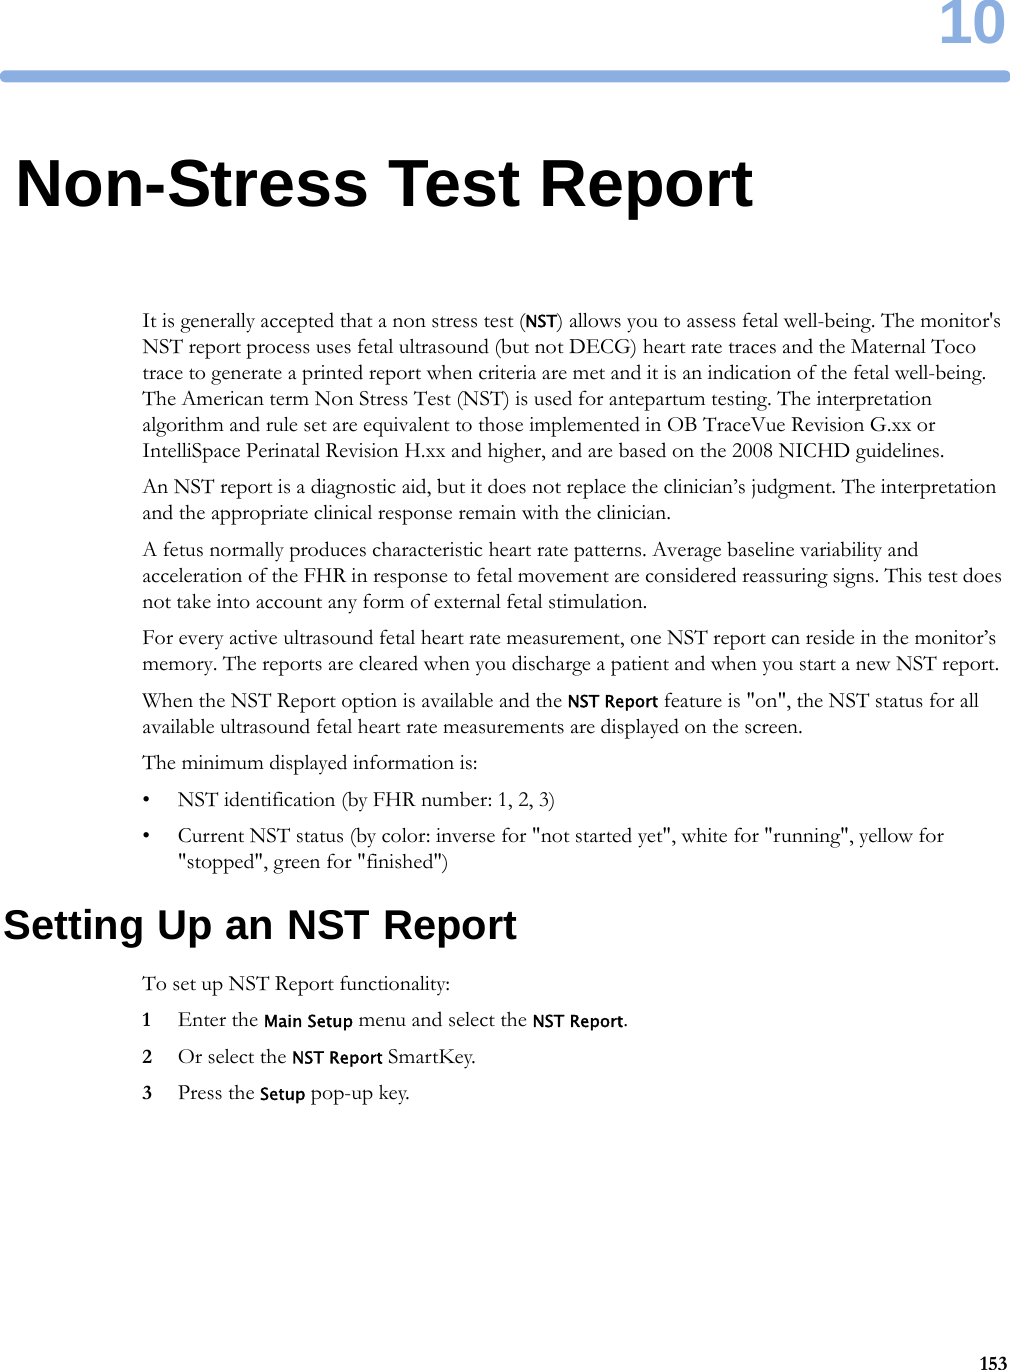 1015310Non-Stress Test ReportIt is generally accepted that a non stress test (NST) allows you to assess fetal well-being. The monitor&apos;s NST report process uses fetal ultrasound (but not DECG) heart rate traces and the Maternal Toco trace to generate a printed report when criteria are met and it is an indication of the fetal well-being. The American term Non Stress Test (NST) is used for antepartum testing. The interpretation algorithm and rule set are equivalent to those implemented in OB TraceVue Revision G.xx or IntelliSpace Perinatal Revision H.xx and higher, and are based on the 2008 NICHD guidelines.An NST report is a diagnostic aid, but it does not replace the clinician’s judgment. The interpretation and the appropriate clinical response remain with the clinician.A fetus normally produces characteristic heart rate patterns. Average baseline variability and acceleration of the FHR in response to fetal movement are considered reassuring signs. This test does not take into account any form of external fetal stimulation.For every active ultrasound fetal heart rate measurement, one NST report can reside in the monitor’s memory. The reports are cleared when you discharge a patient and when you start a new NST report.When the NST Report option is available and the NST Report feature is &quot;on&quot;, the NST status for all available ultrasound fetal heart rate measurements are displayed on the screen.The minimum displayed information is:• NST identification (by FHR number: 1, 2, 3)• Current NST status (by color: inverse for &quot;not started yet&quot;, white for &quot;running&quot;, yellow for &quot;stopped&quot;, green for &quot;finished&quot;)Setting Up an NST ReportTo set up NST Report functionality:1Enter the Main Setup menu and select the NST Report.2Or select the NST Report SmartKey.3Press the Setup pop-up key.